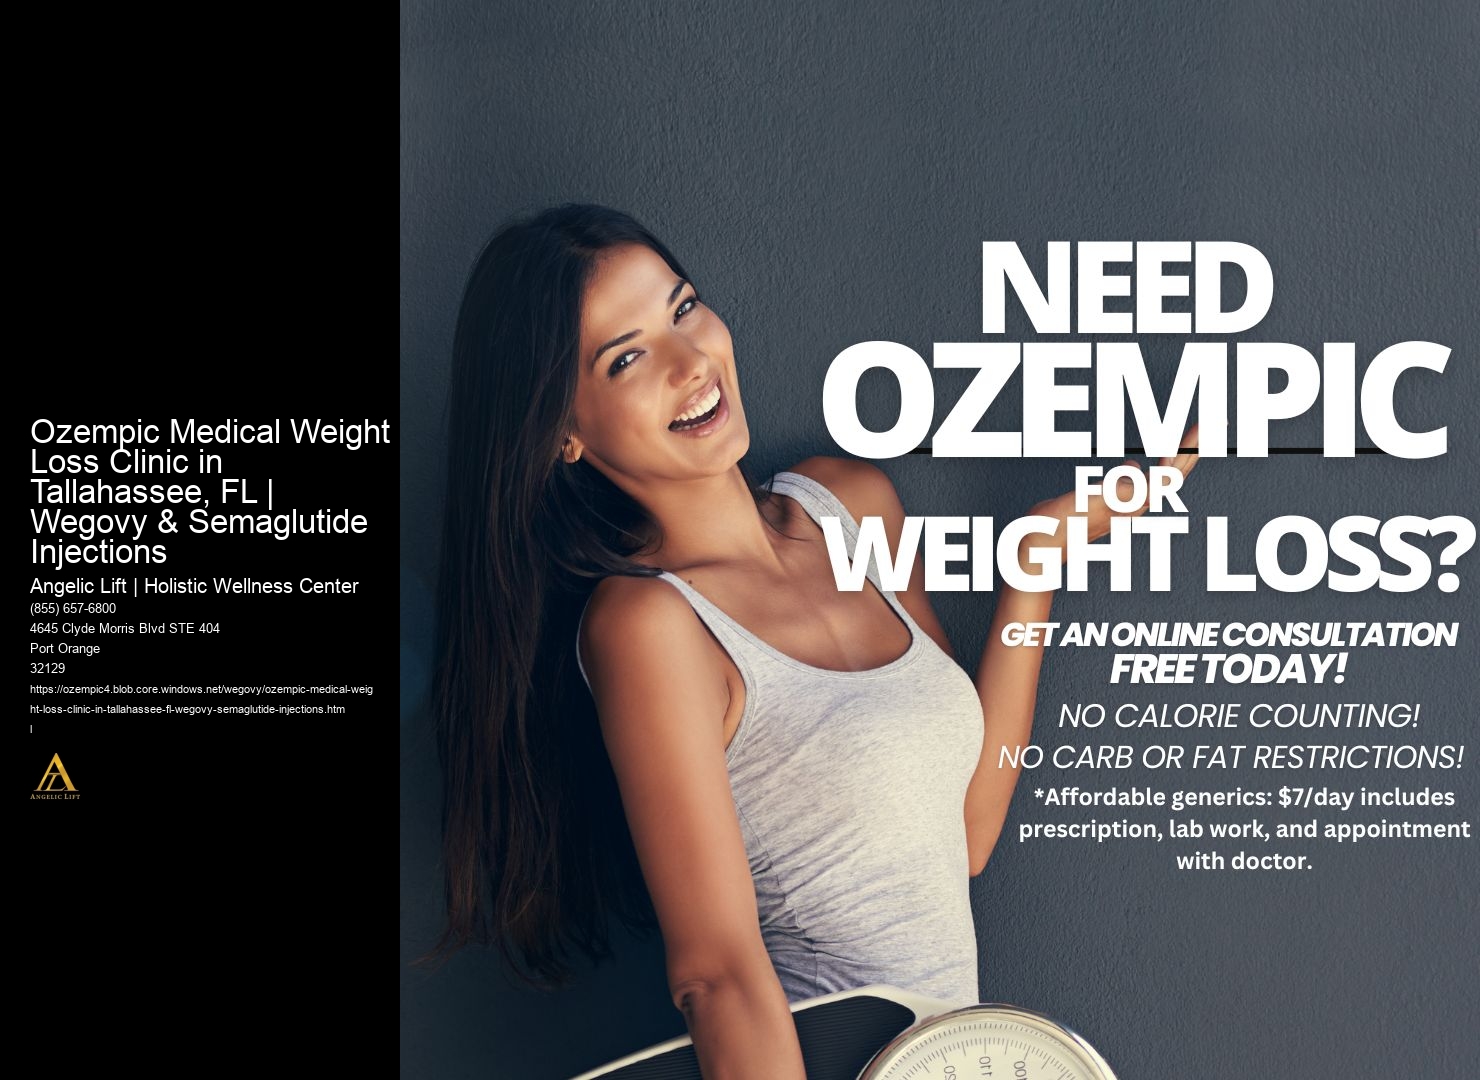 Ozempic Medical Weight Loss Clinic in Tallahassee, FL | Wegovy & Semaglutide Injections